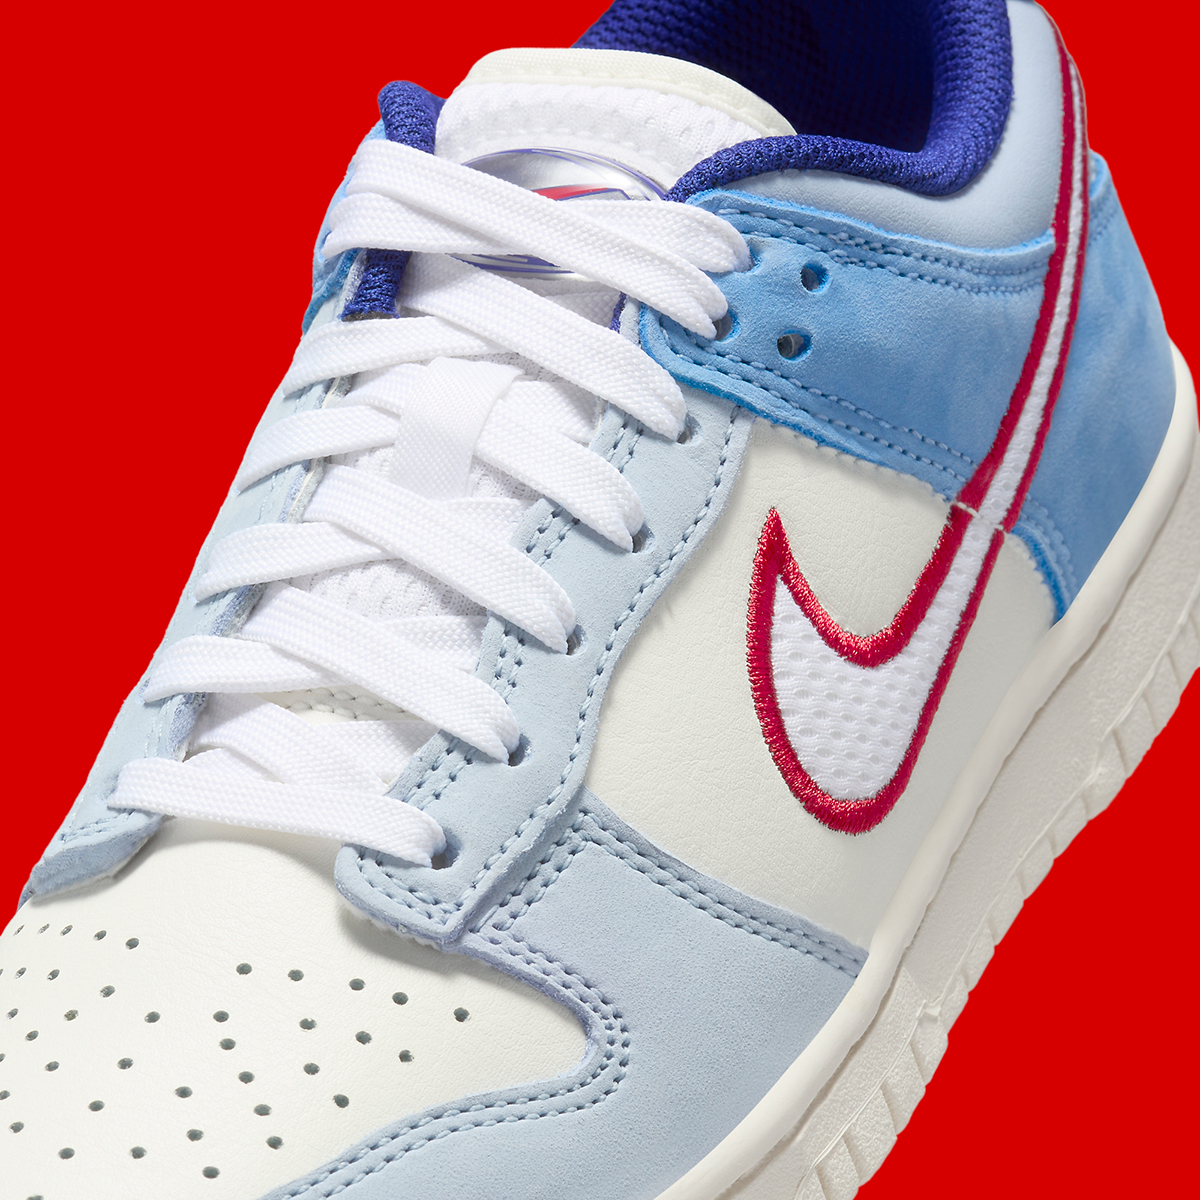 Nike Dunk Low Gs White Blue Red Mesh Hf5742 111 1